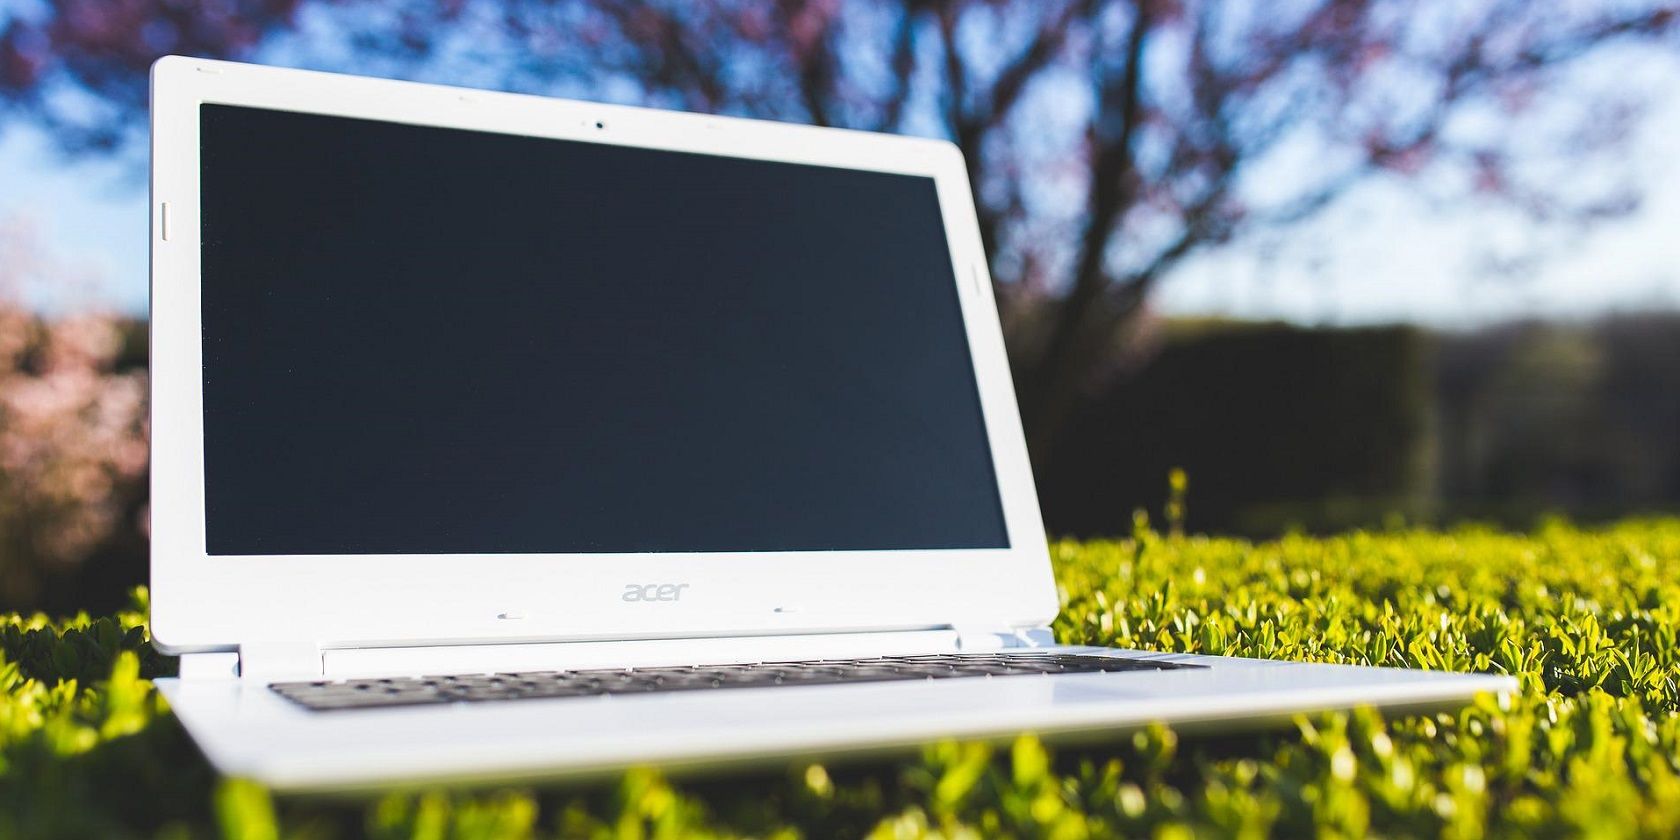 Image of laptop on grass outside